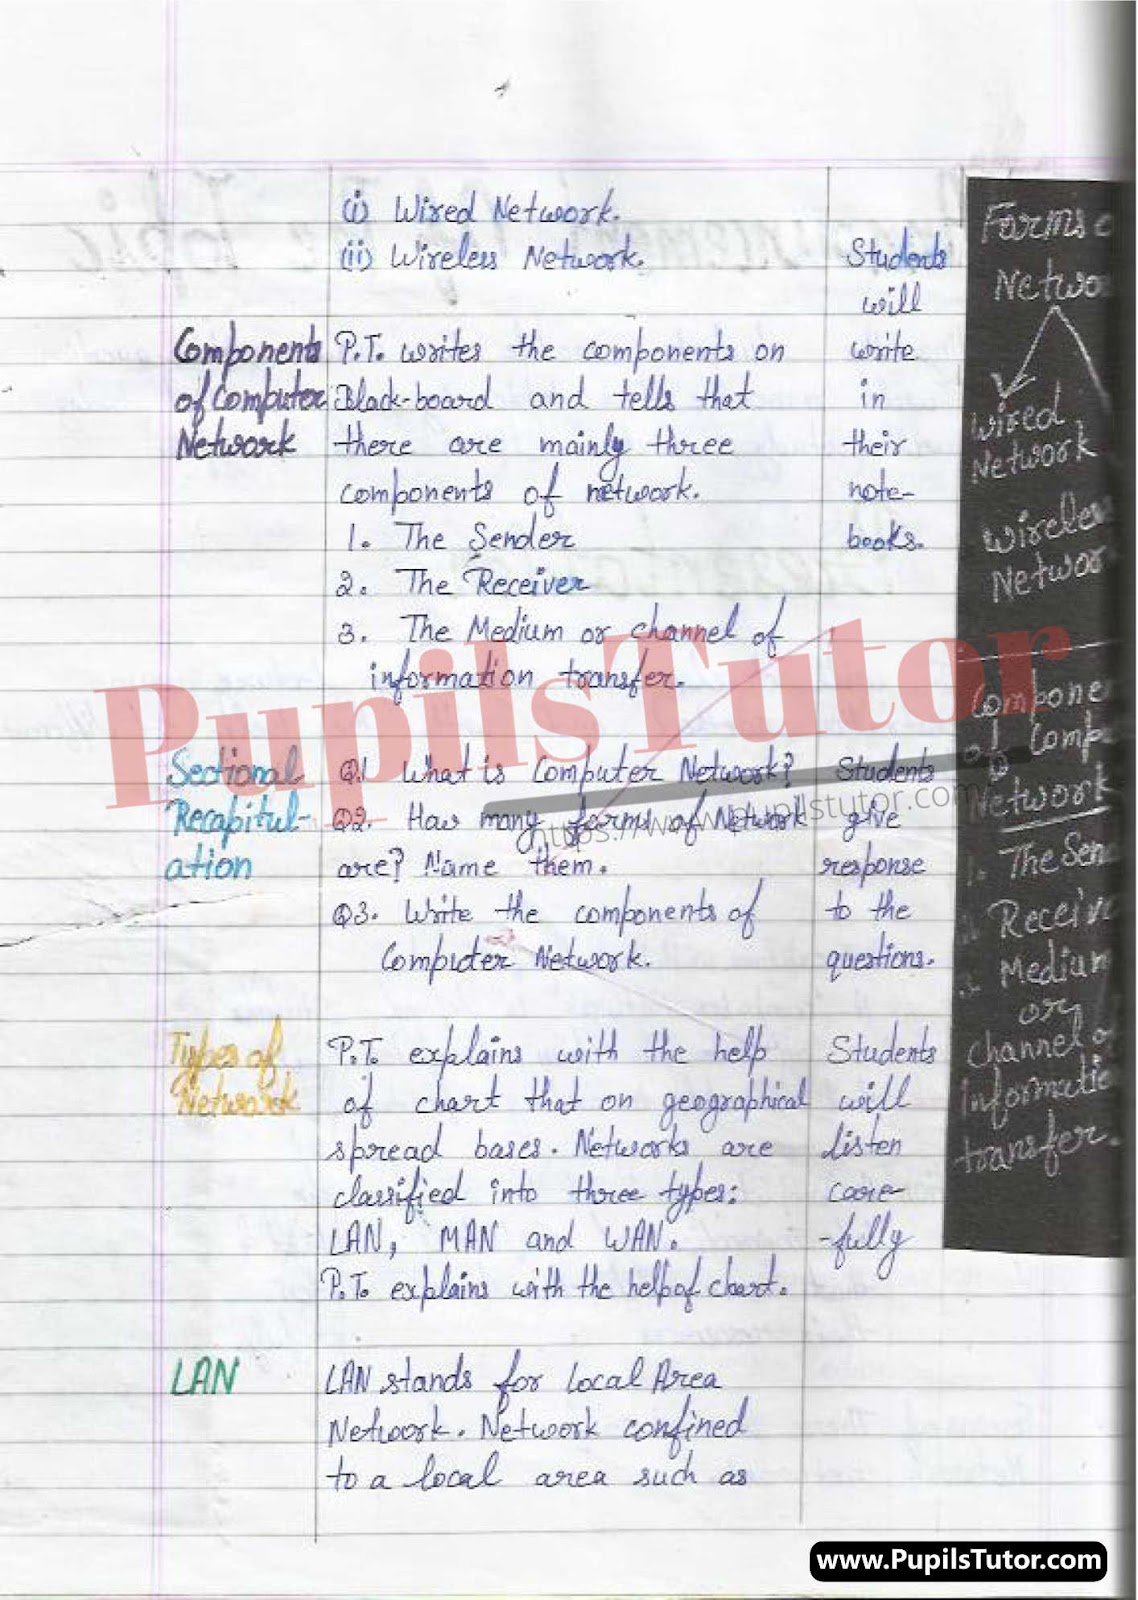 BED, DELED, BTC, BSTC, M.ED, DED And NIOS Teaching Of Computer Innovative Digital Lesson Plan Format On Types Of Computer Networks Topic For Class 4th 5th 6th 7th 8th 9th, 10th, 11th, 12th  – [Page And Photo 4] – pupilstutor.com